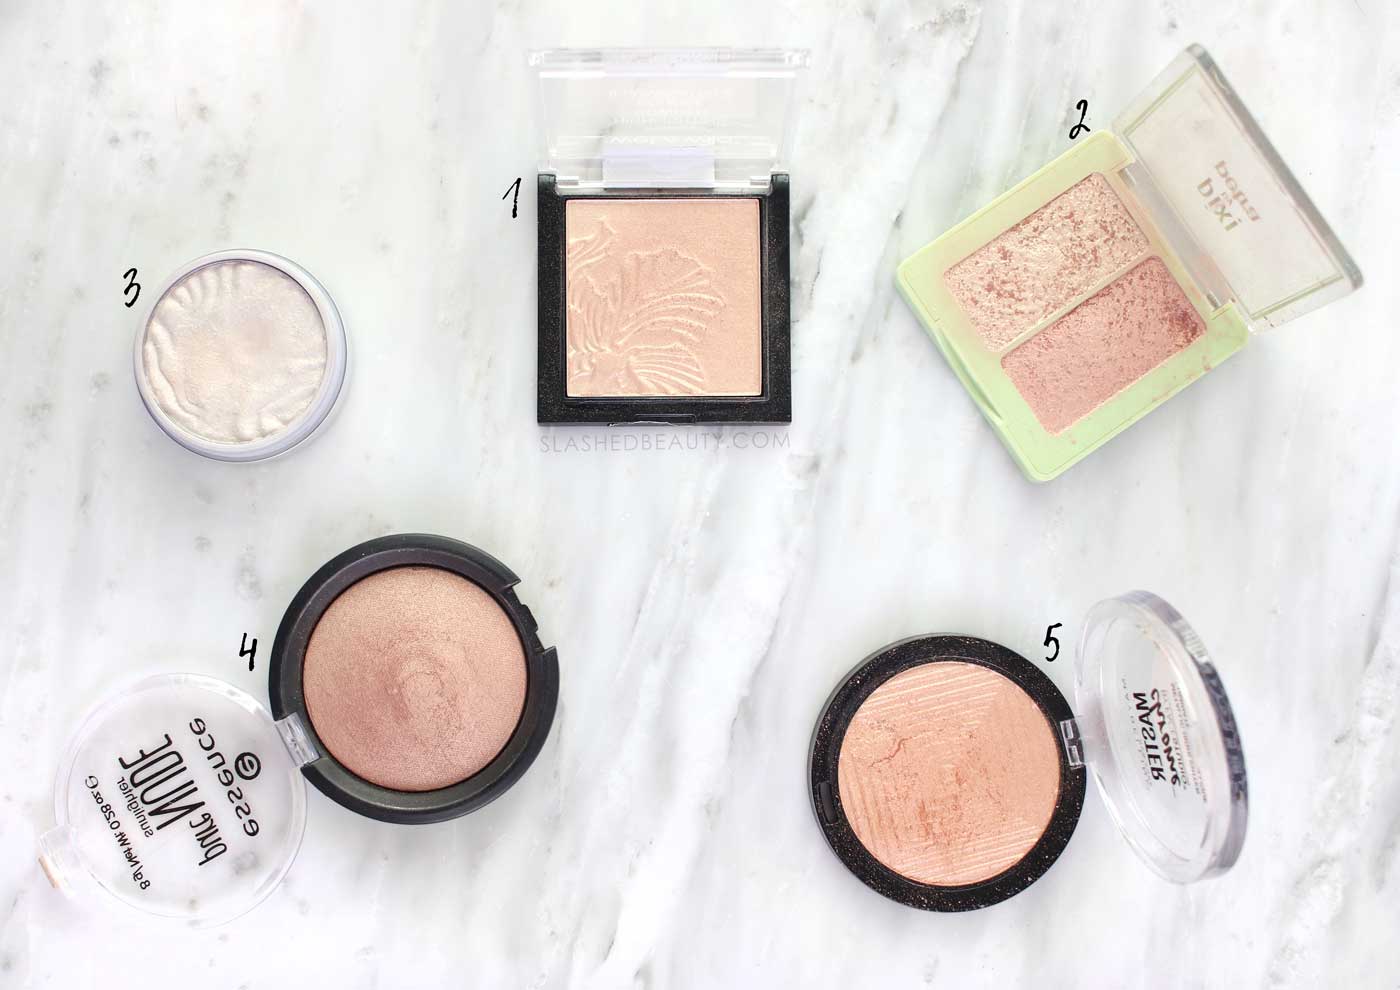 The Best Drugstore Highlighters | Drugstore Highlighter Swatches | Slashed Beauty